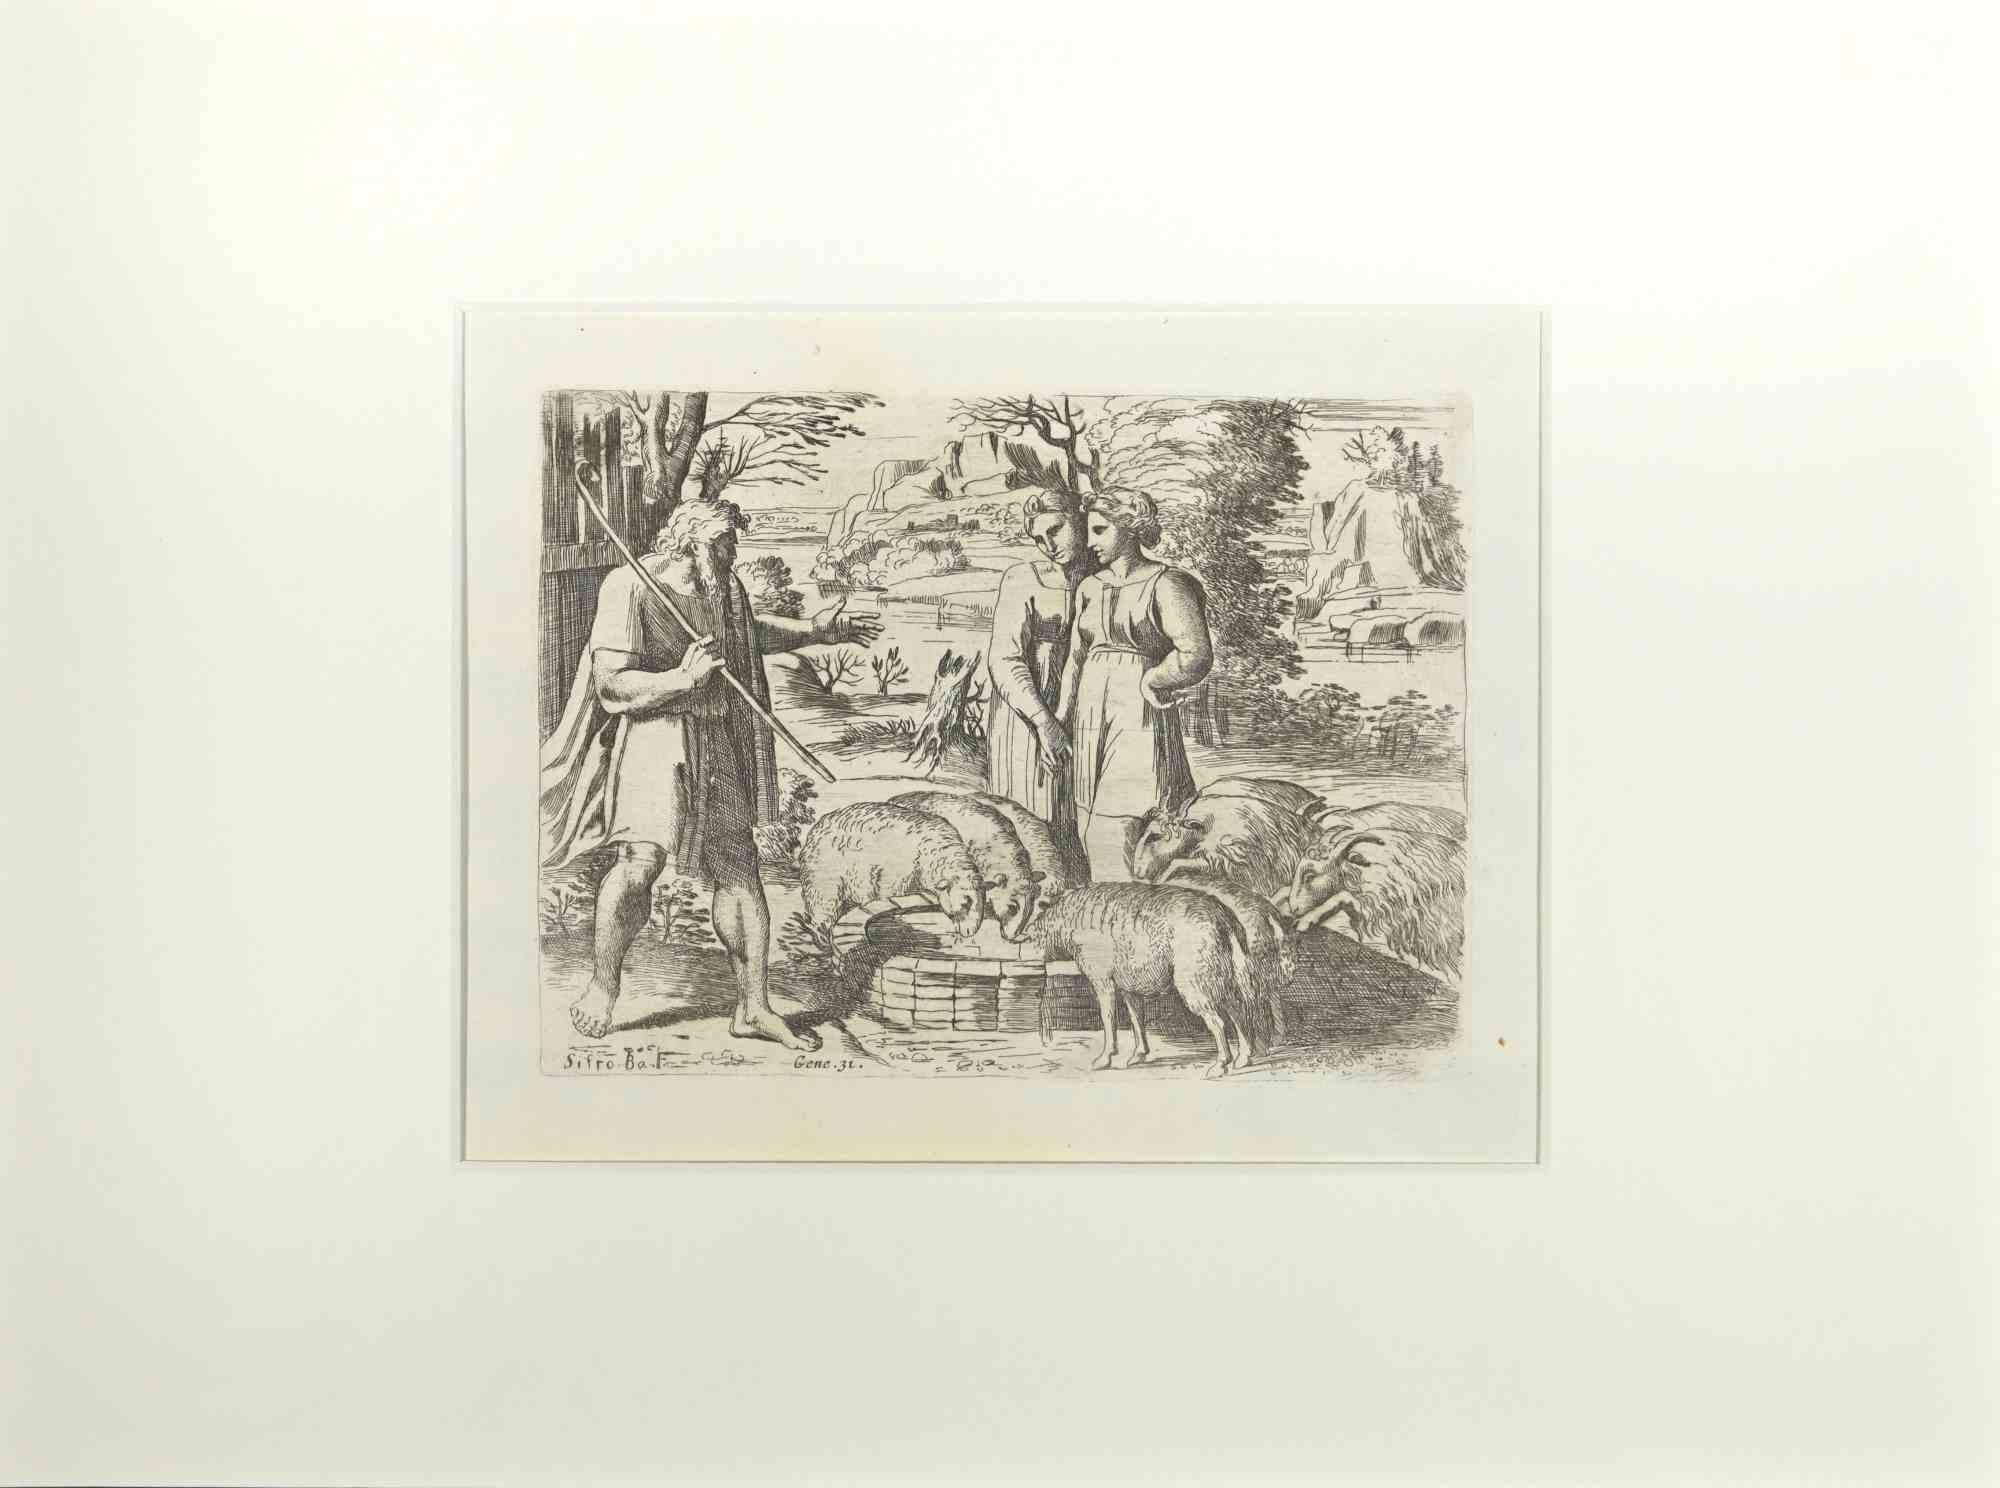 Genesis 31 -Old Testament Story is an Etching print realized by the artist Sisto Badalocchio.

About The Old Testament Story, 1607 ca.

Passpartout included 29 x 39 cm

The artwork is in good condition.

Together Giovanni Lanfranco with Sisto